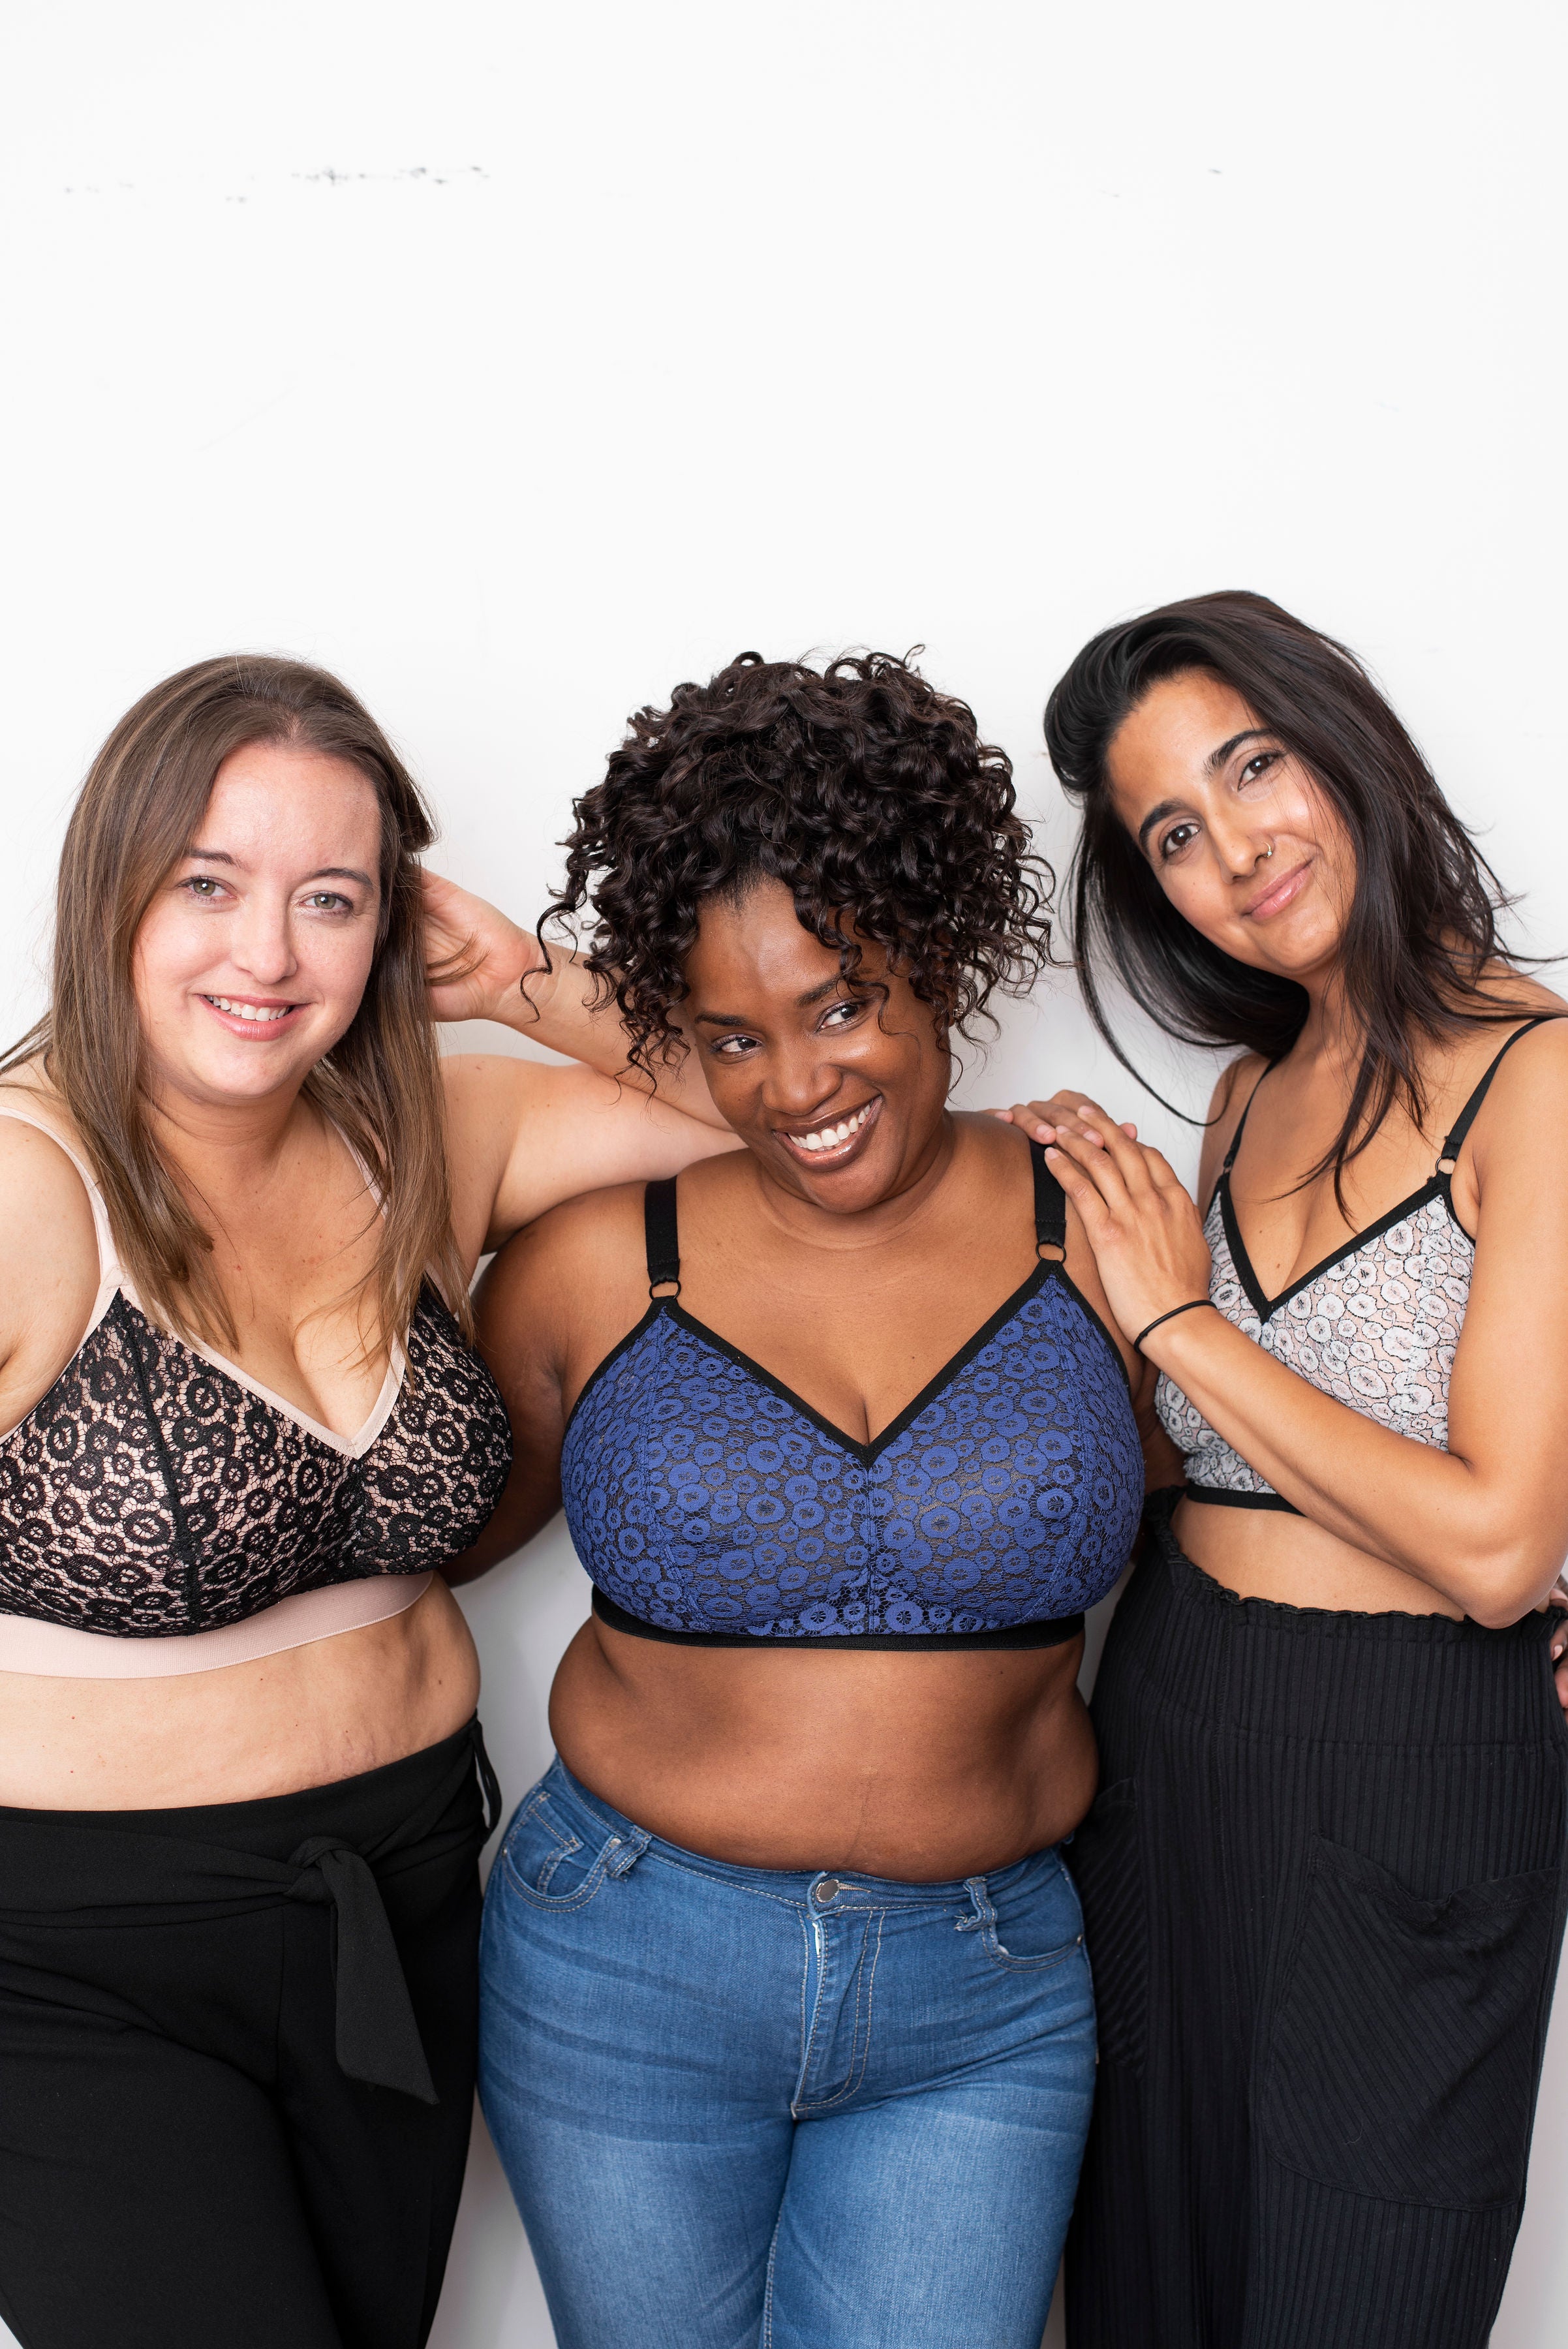 Creating Intimate Wear Featuring Rubies Bras Kits